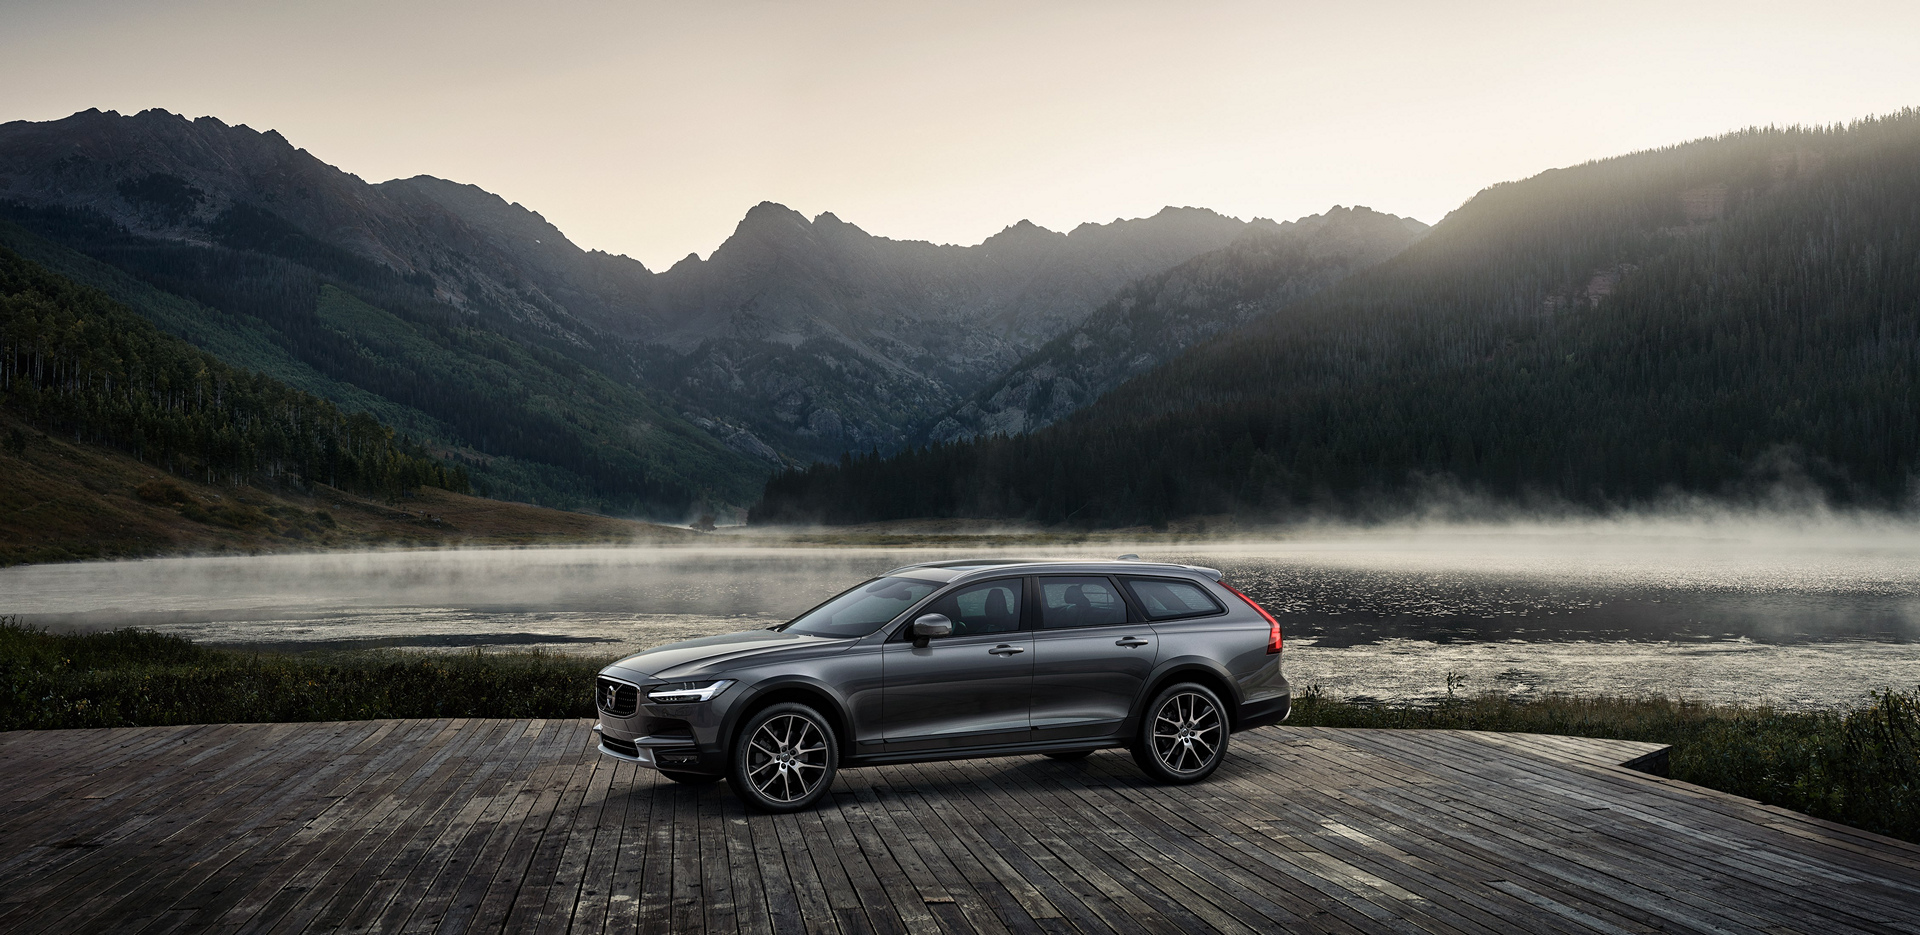 Volvo V90 Cross Country © Zhejiang Geely Holding Group Co., Ltd